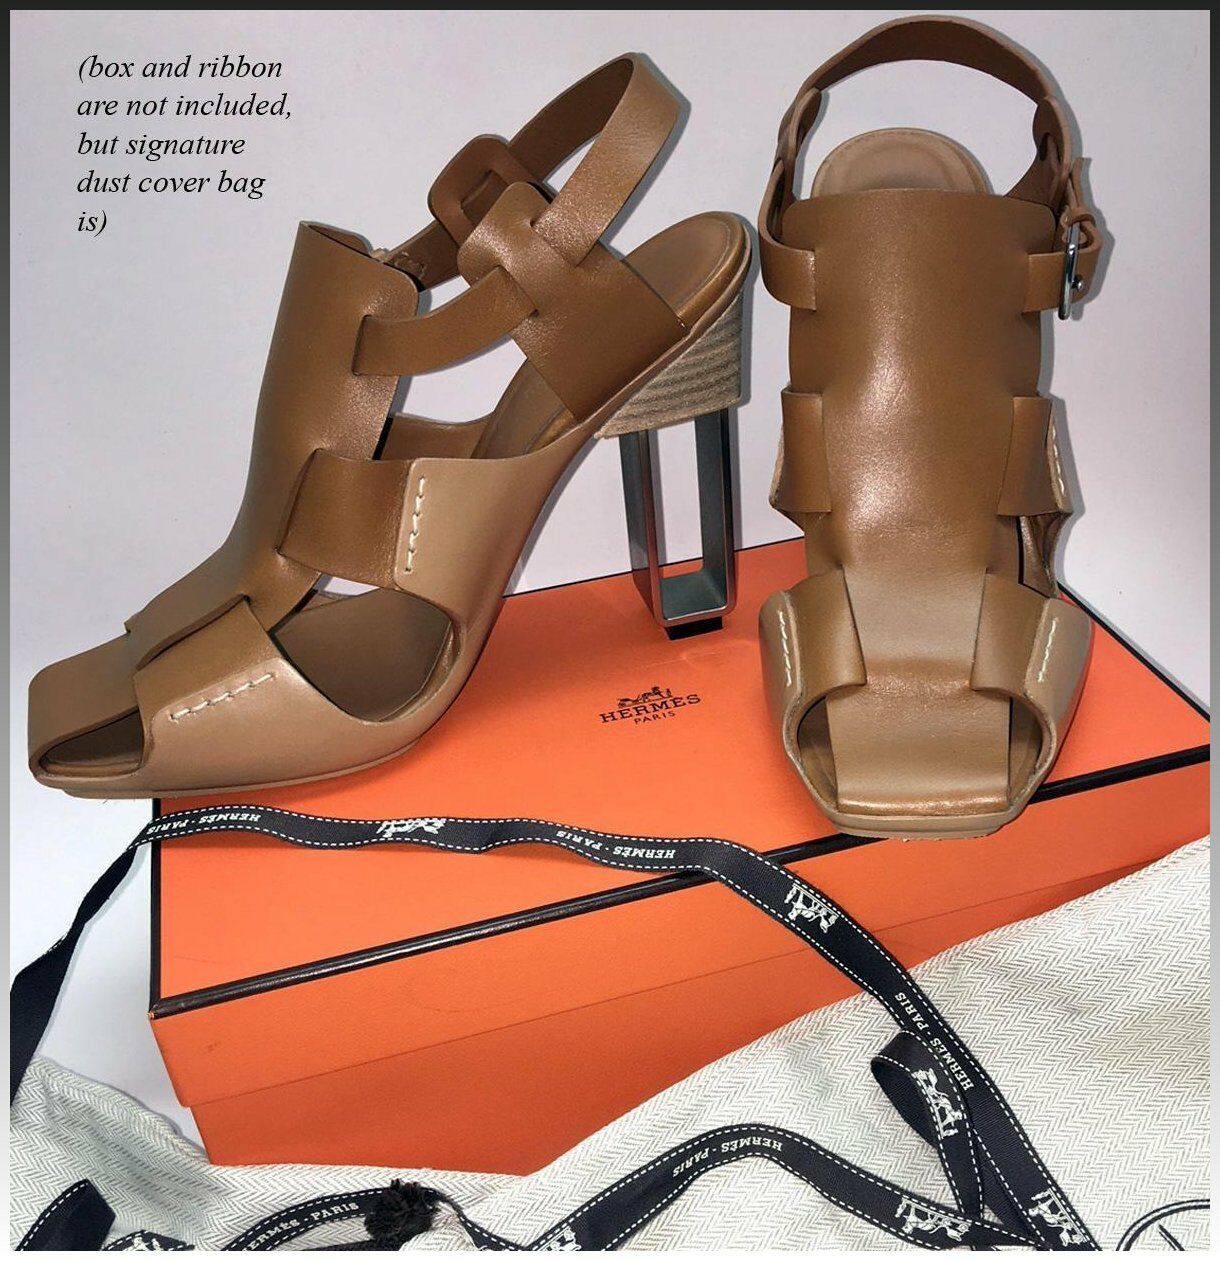 Hermes Sandals, Booties, US 8.5 to 9, EU 39, Saddle Leather, Open Architecture